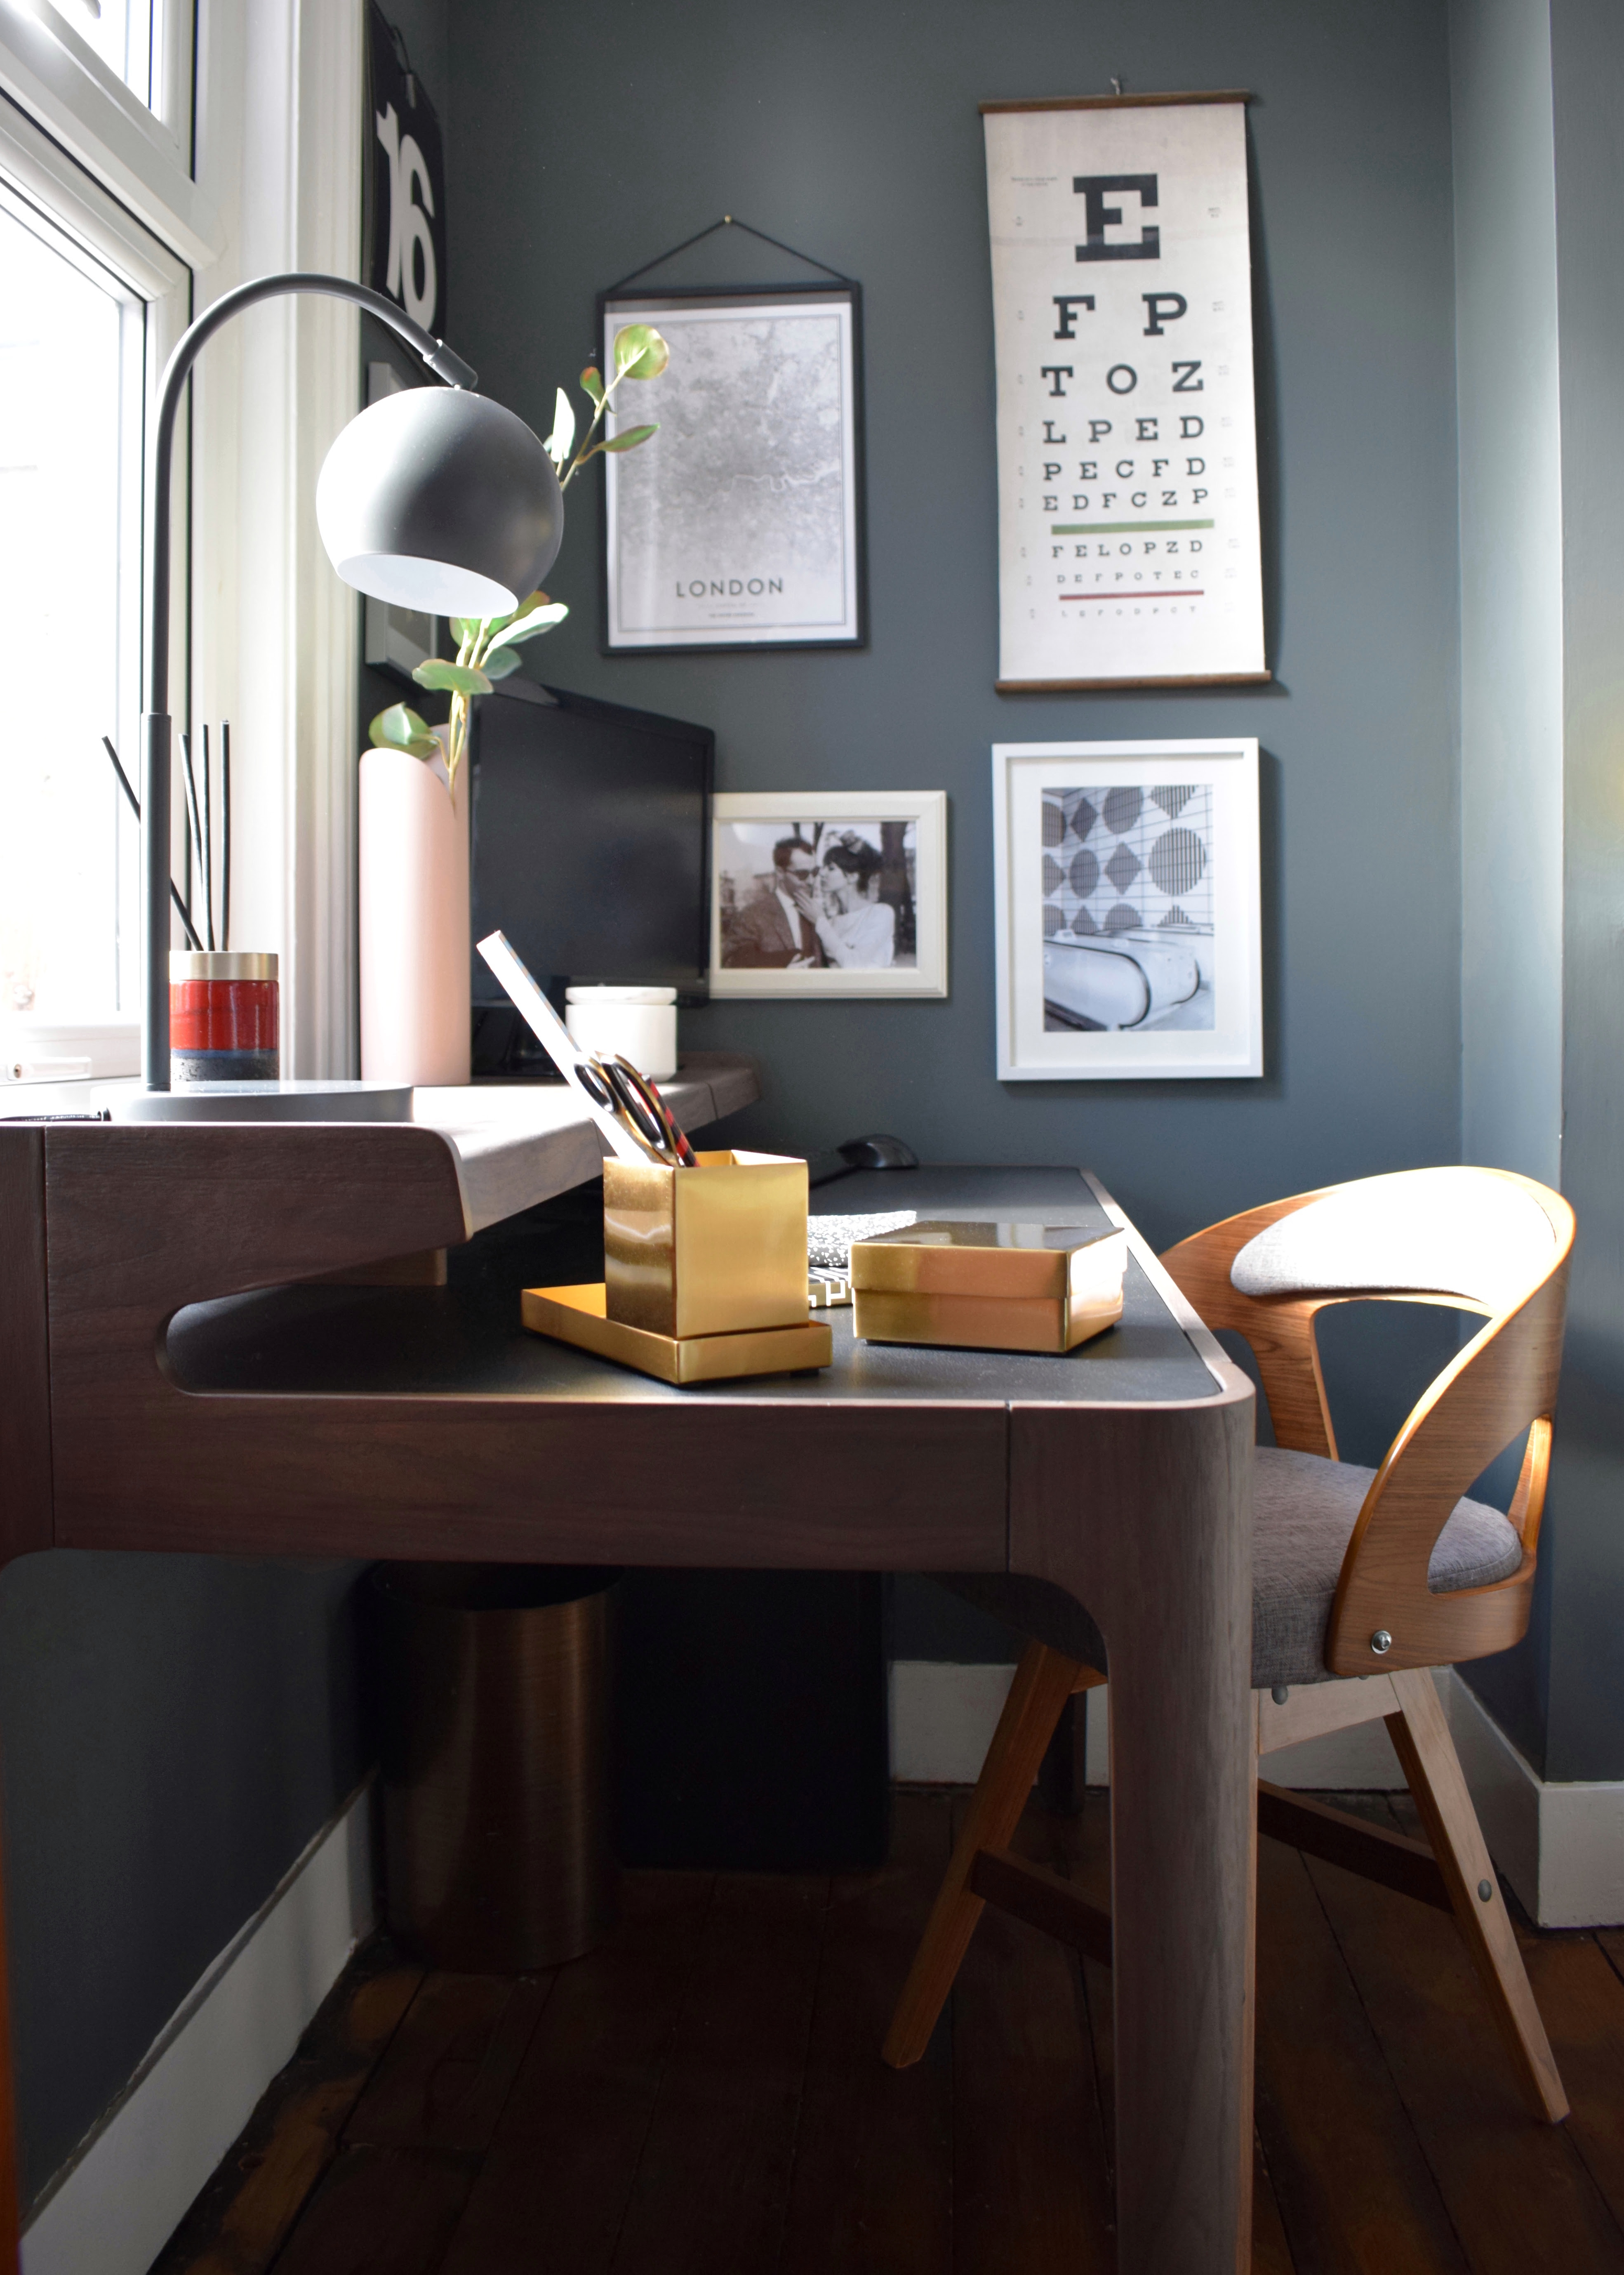 MADE Desk Story Zeke bloggers grey modernist home tour of office